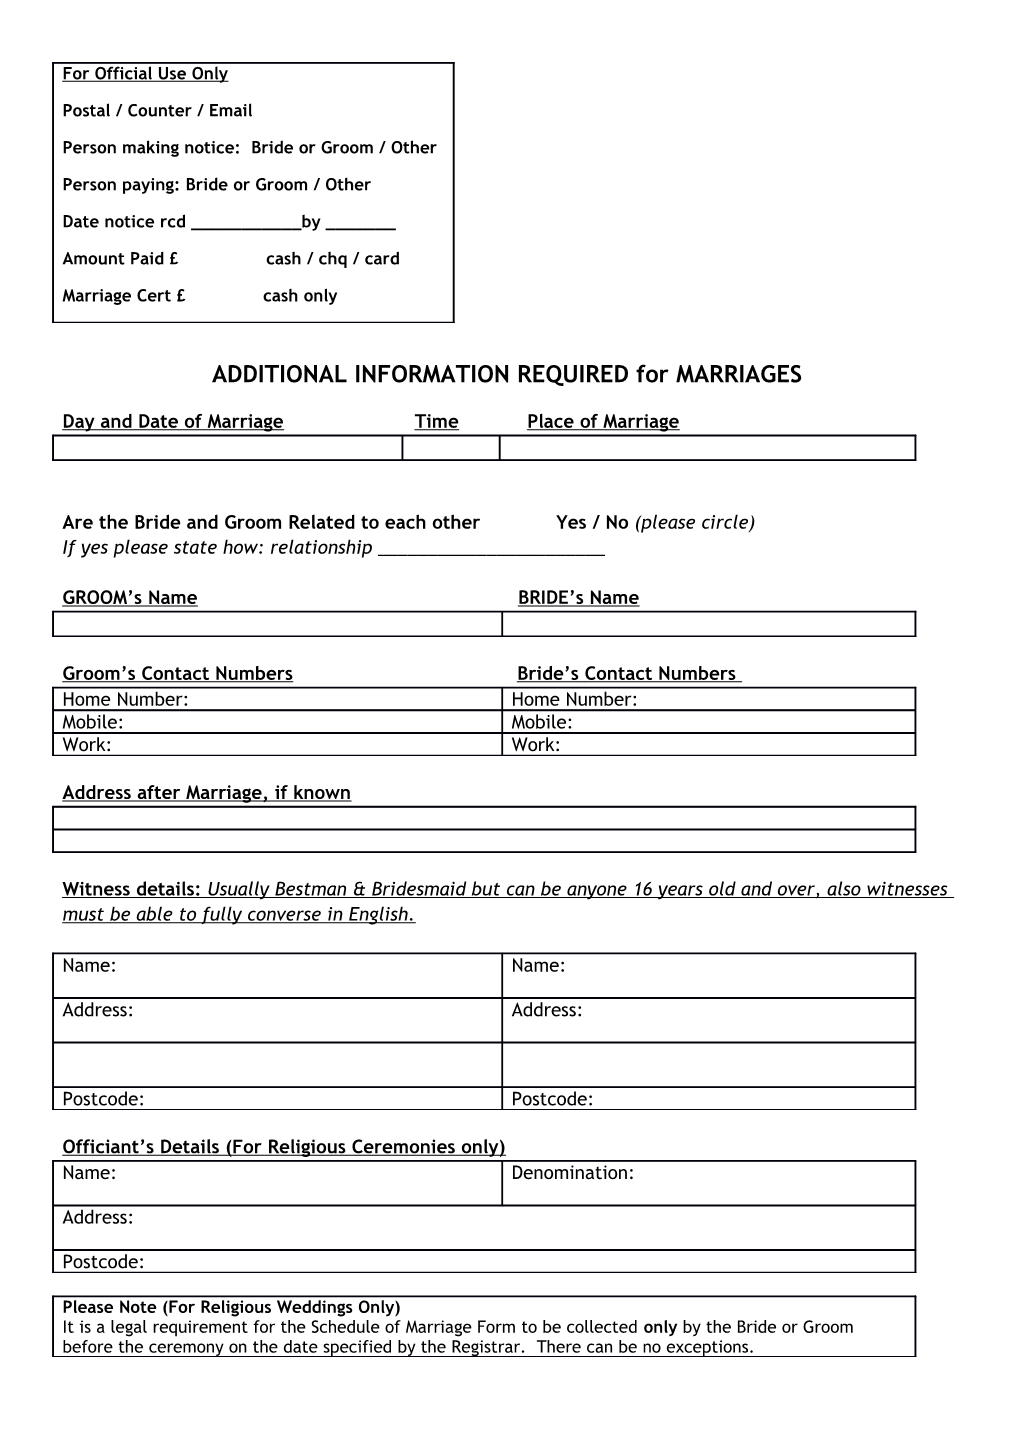 ADDITIONAL INFORMATION REQUIRED for MARRIAGES